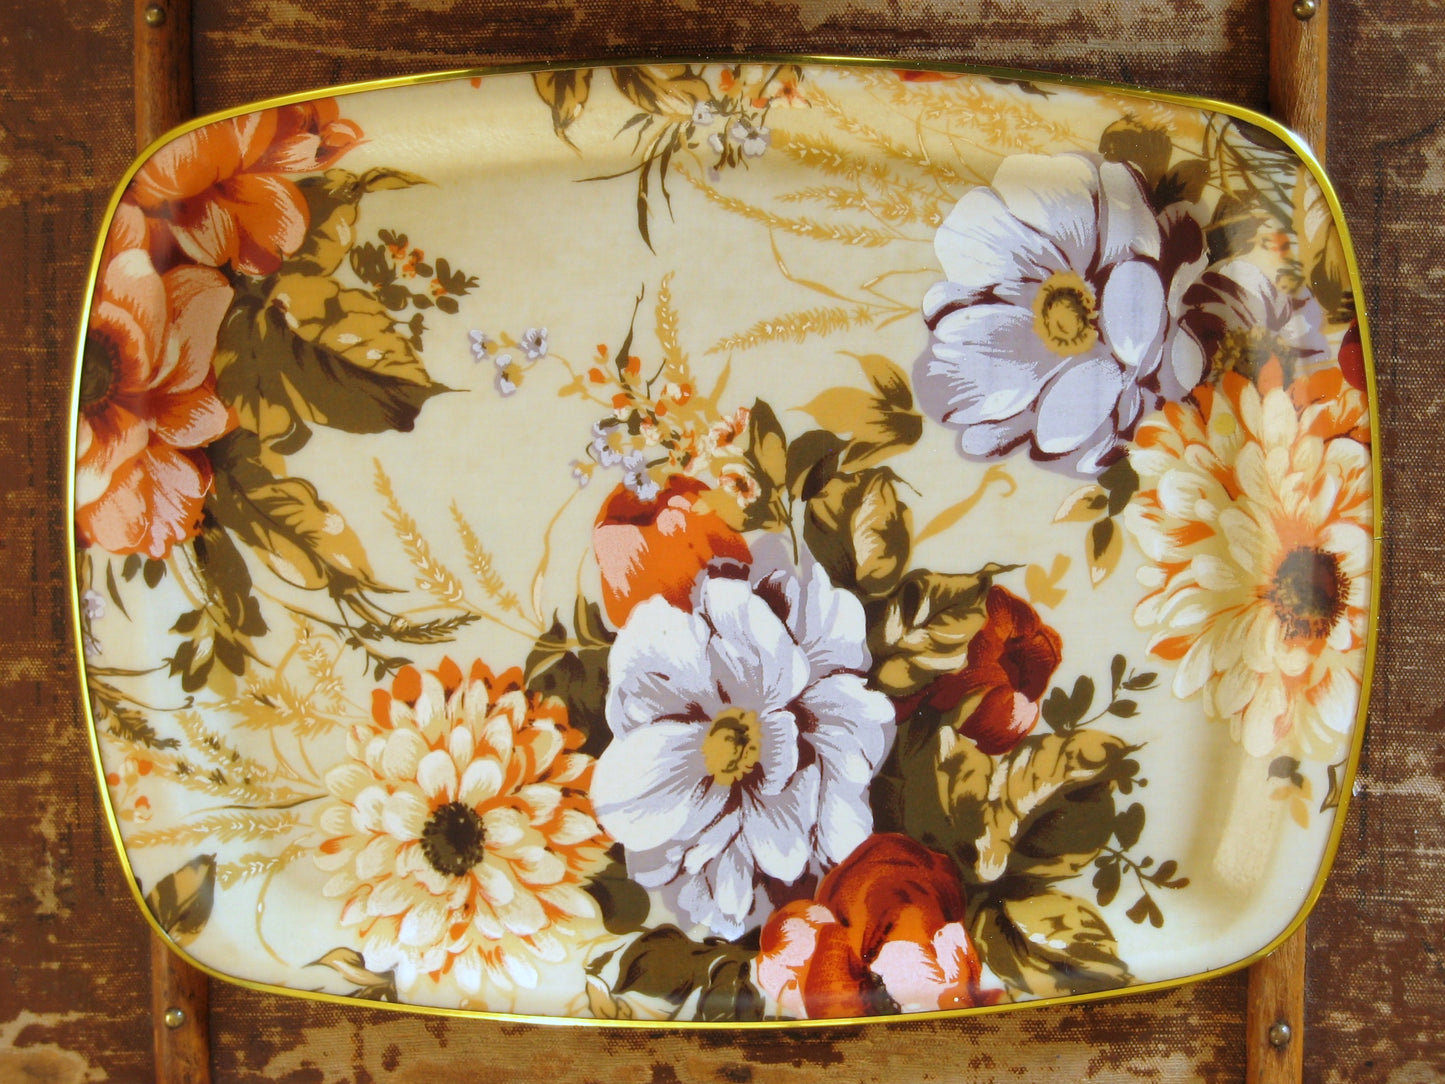 Floral Fiberglass Tray in autumn colors